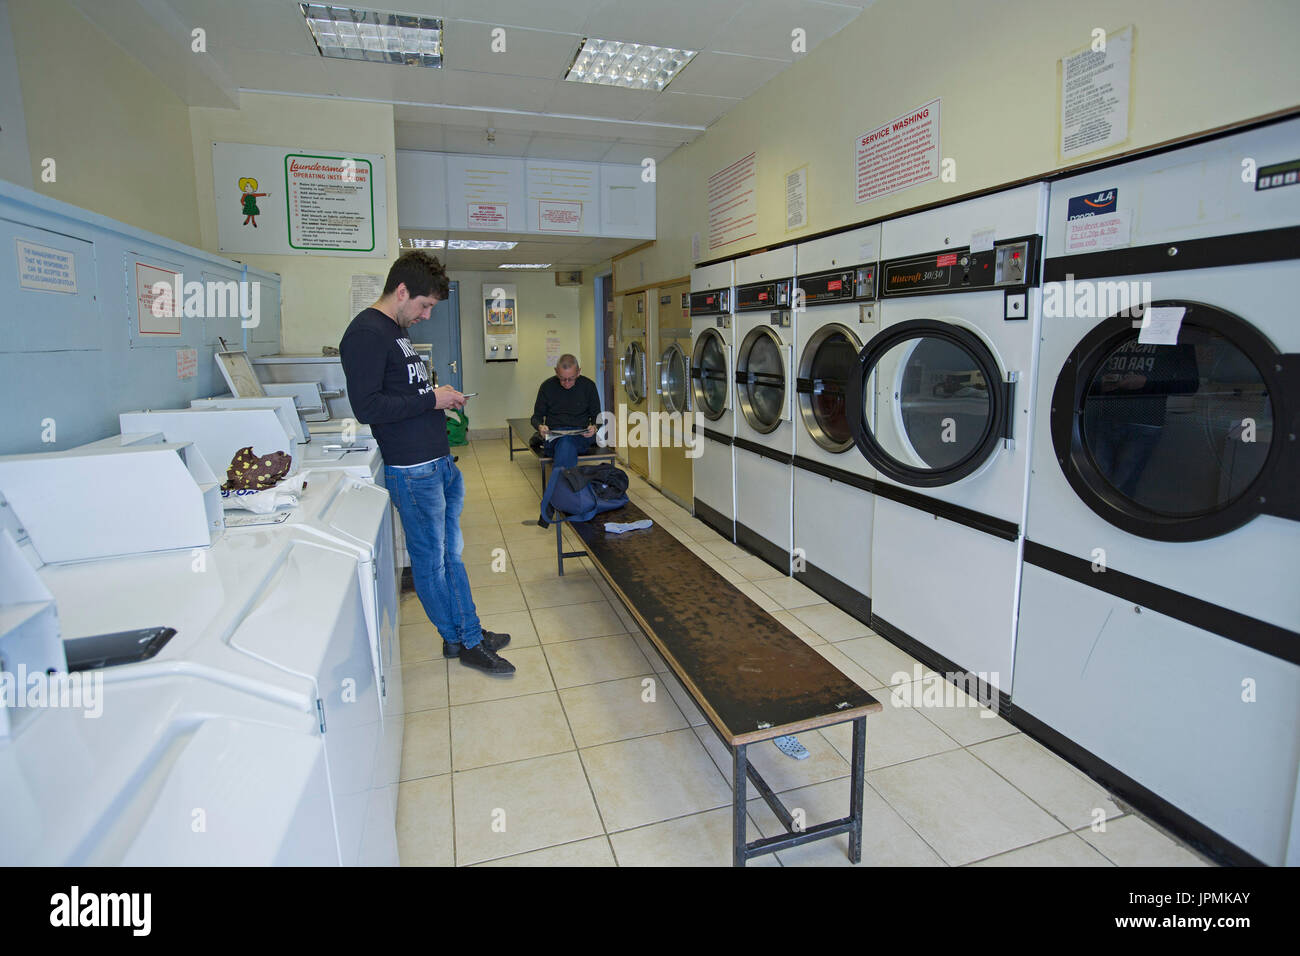 Two men, one reading magazine and one using phone, waiting in laundromat for washing to be completed Stock Photo